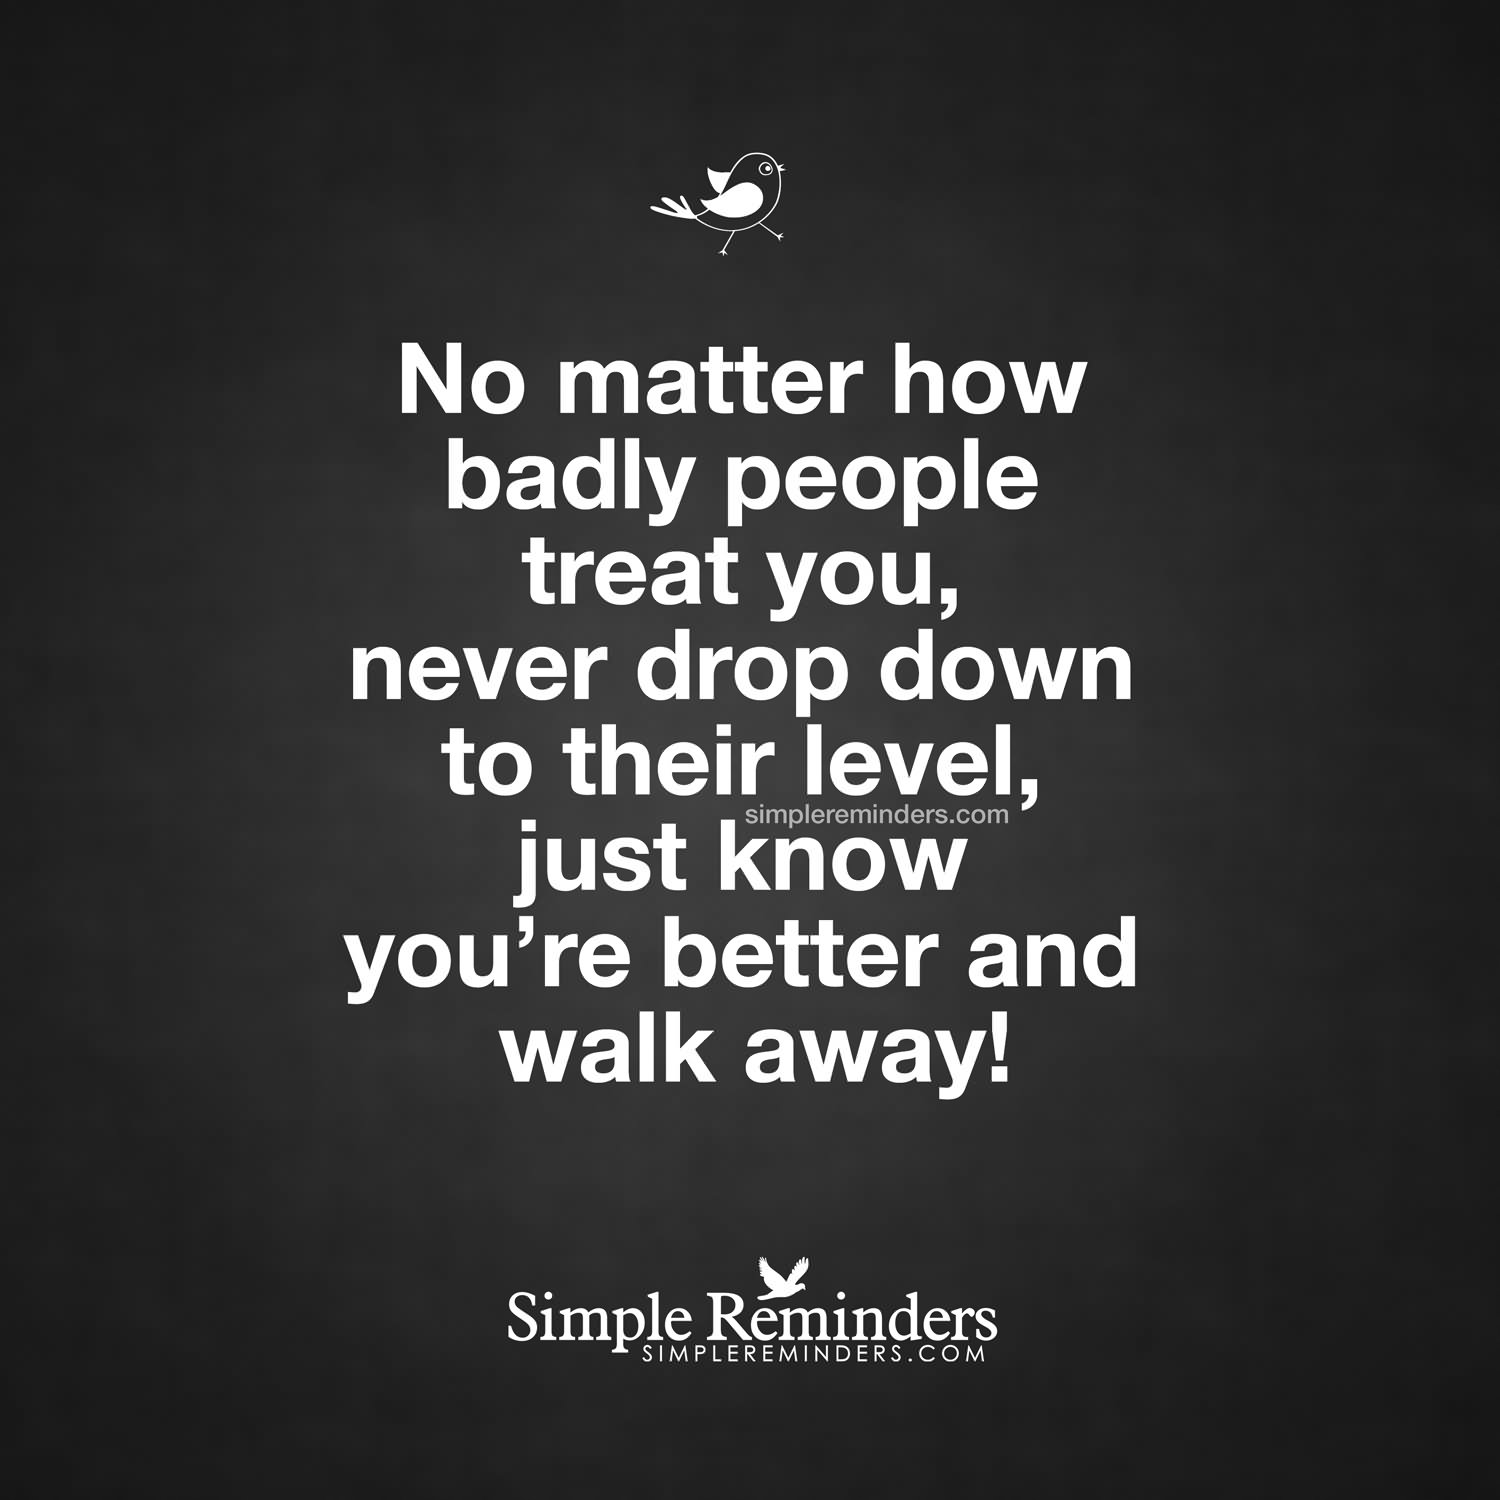 No matter how badly people treat you, never drop down to their level, just know you’re better and walk away.